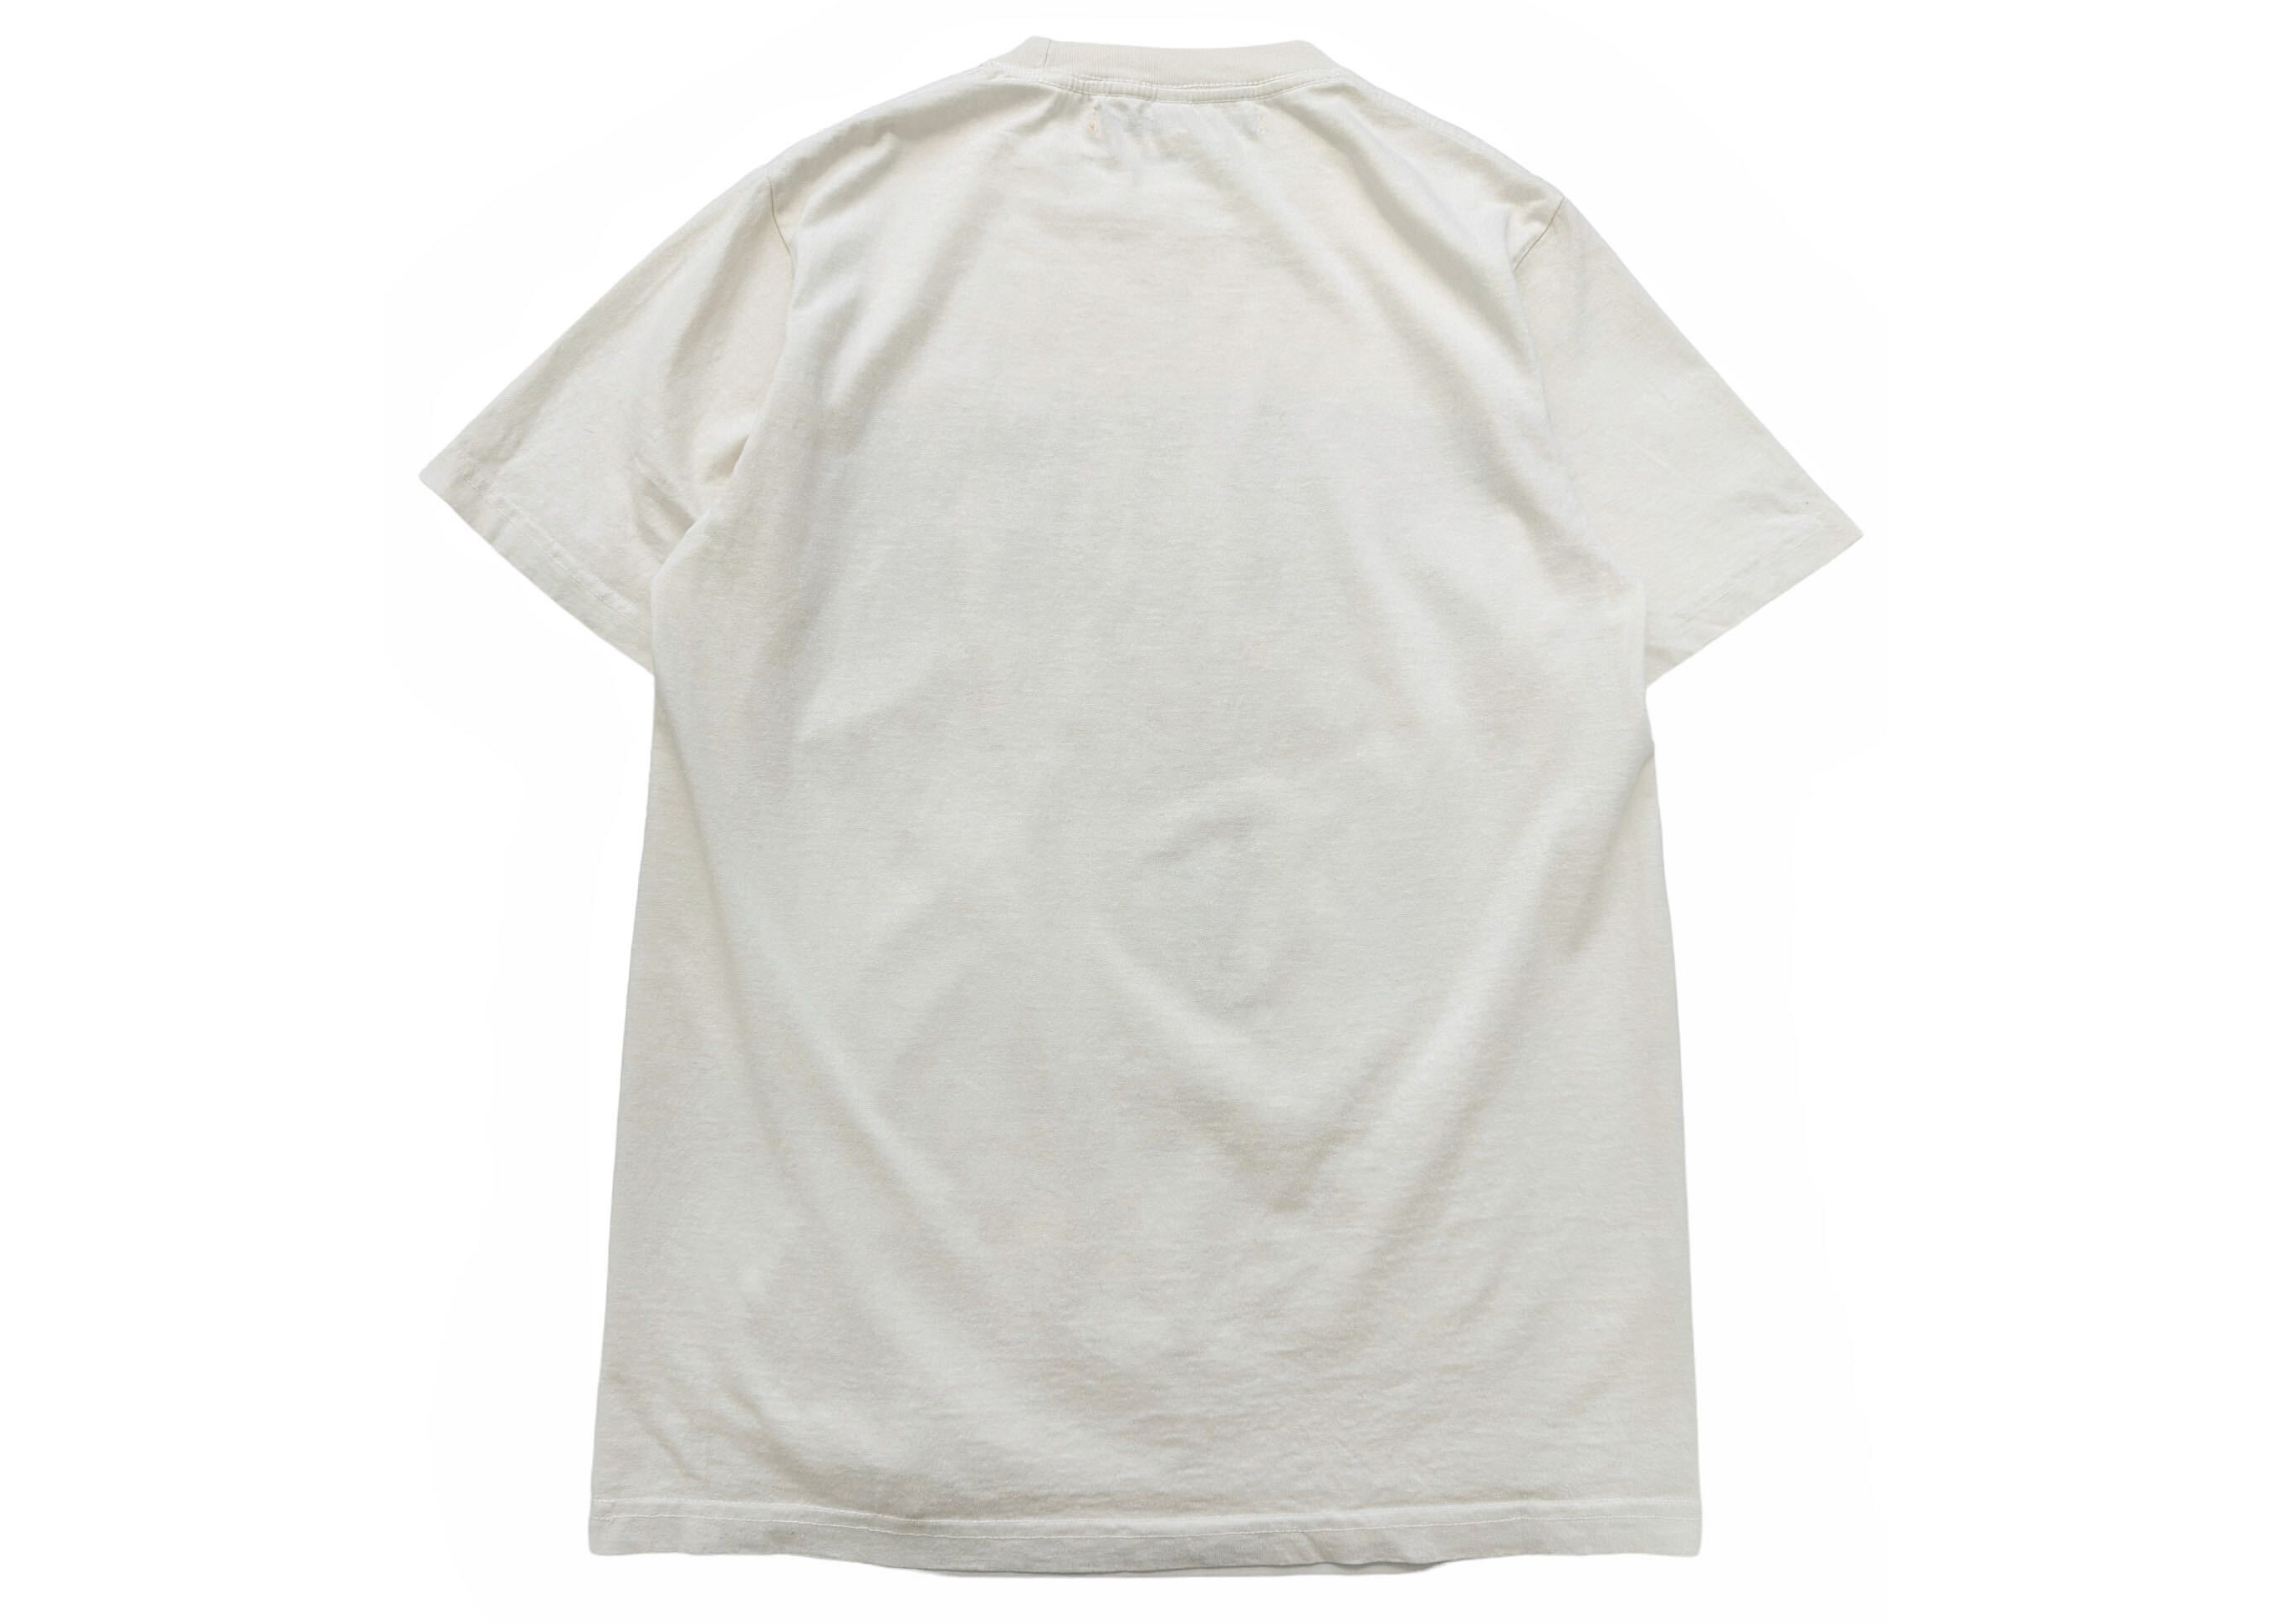 Union x pgLang Kendrick Lamar Big Steppers Tokyo Exclusive Tee White